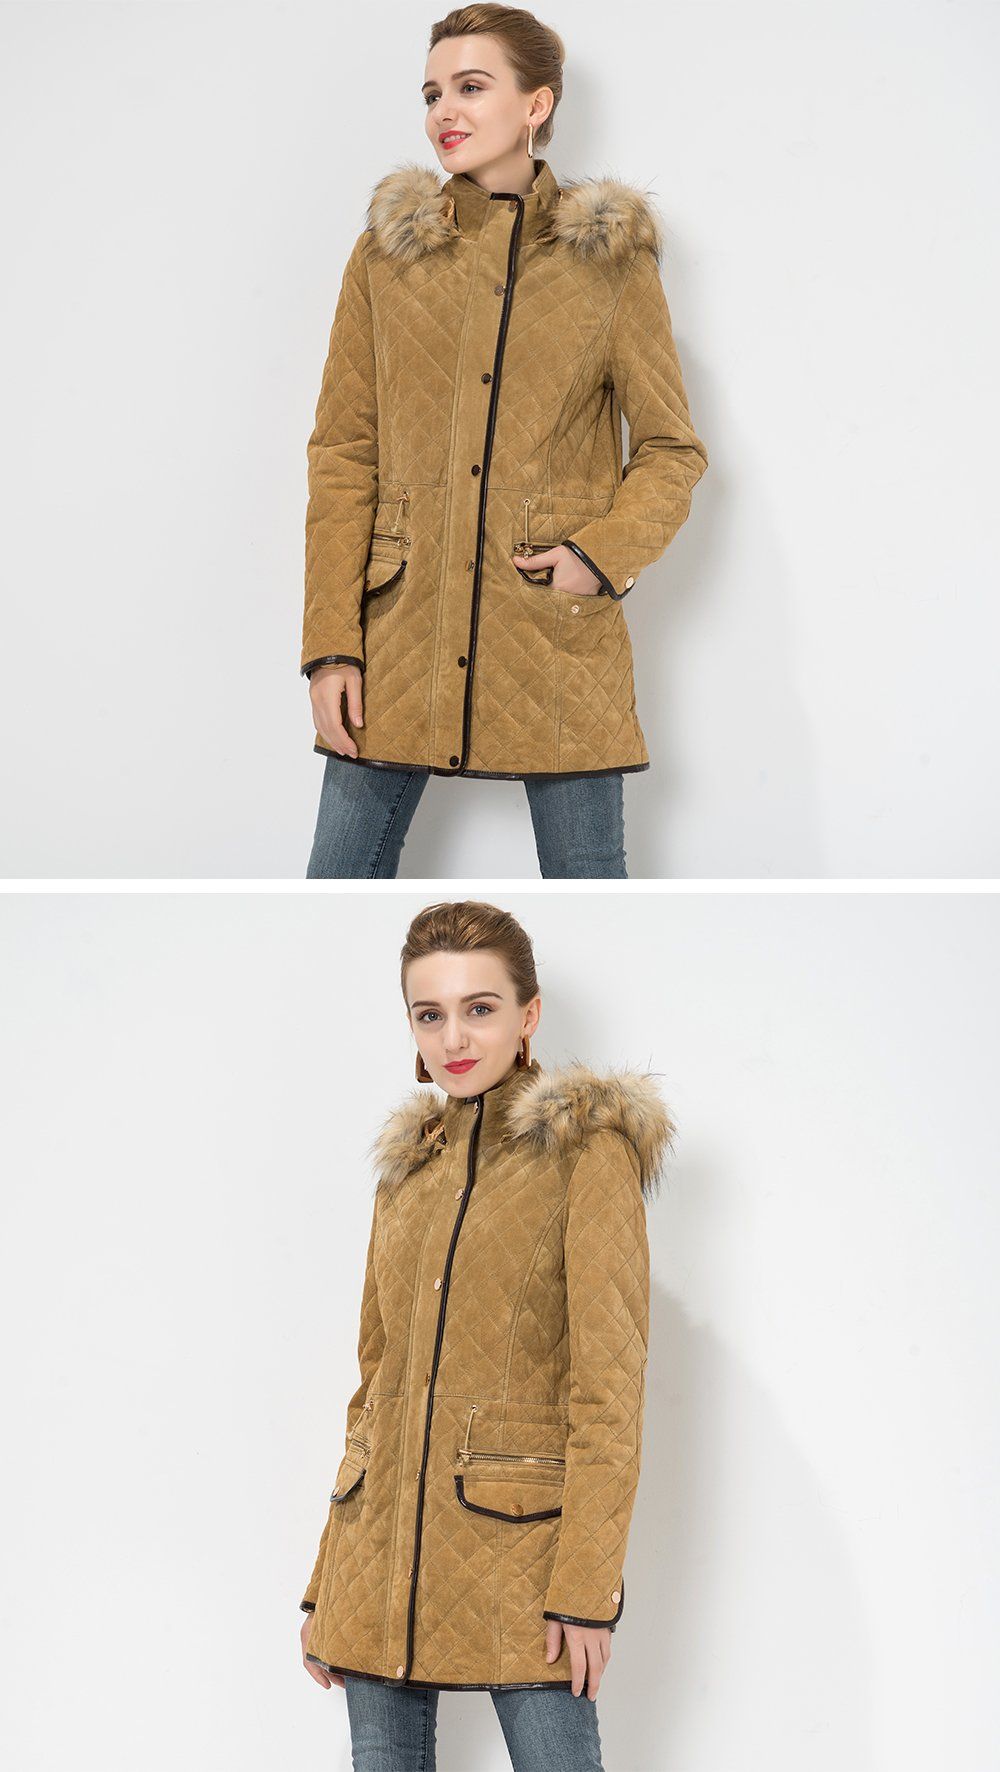 Fur Collar Leather Jacket for
  Women